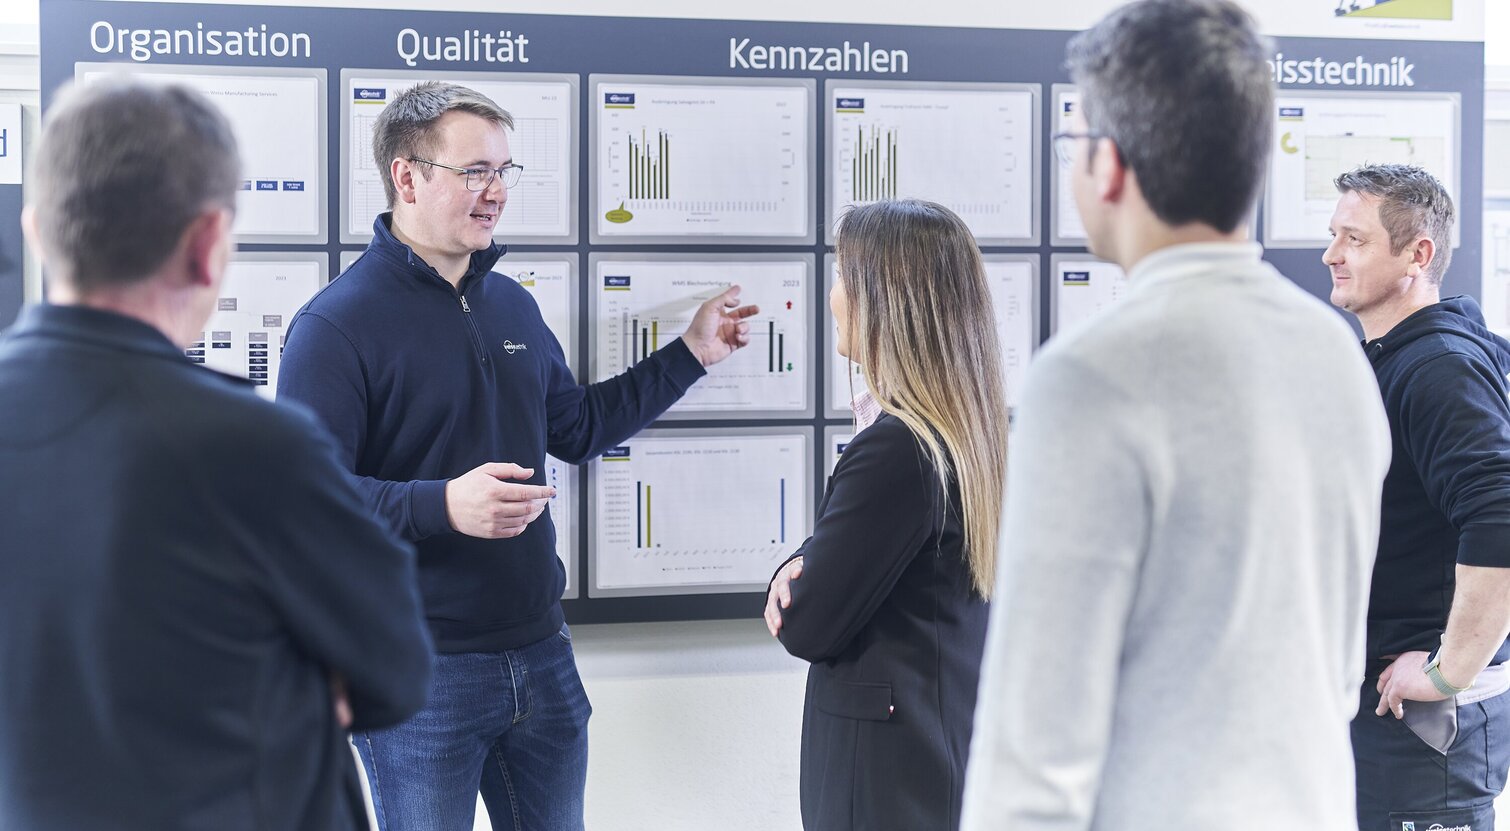  Schunk Group employees at a meeting on key figures in front of a whiteboard with various graphics and information